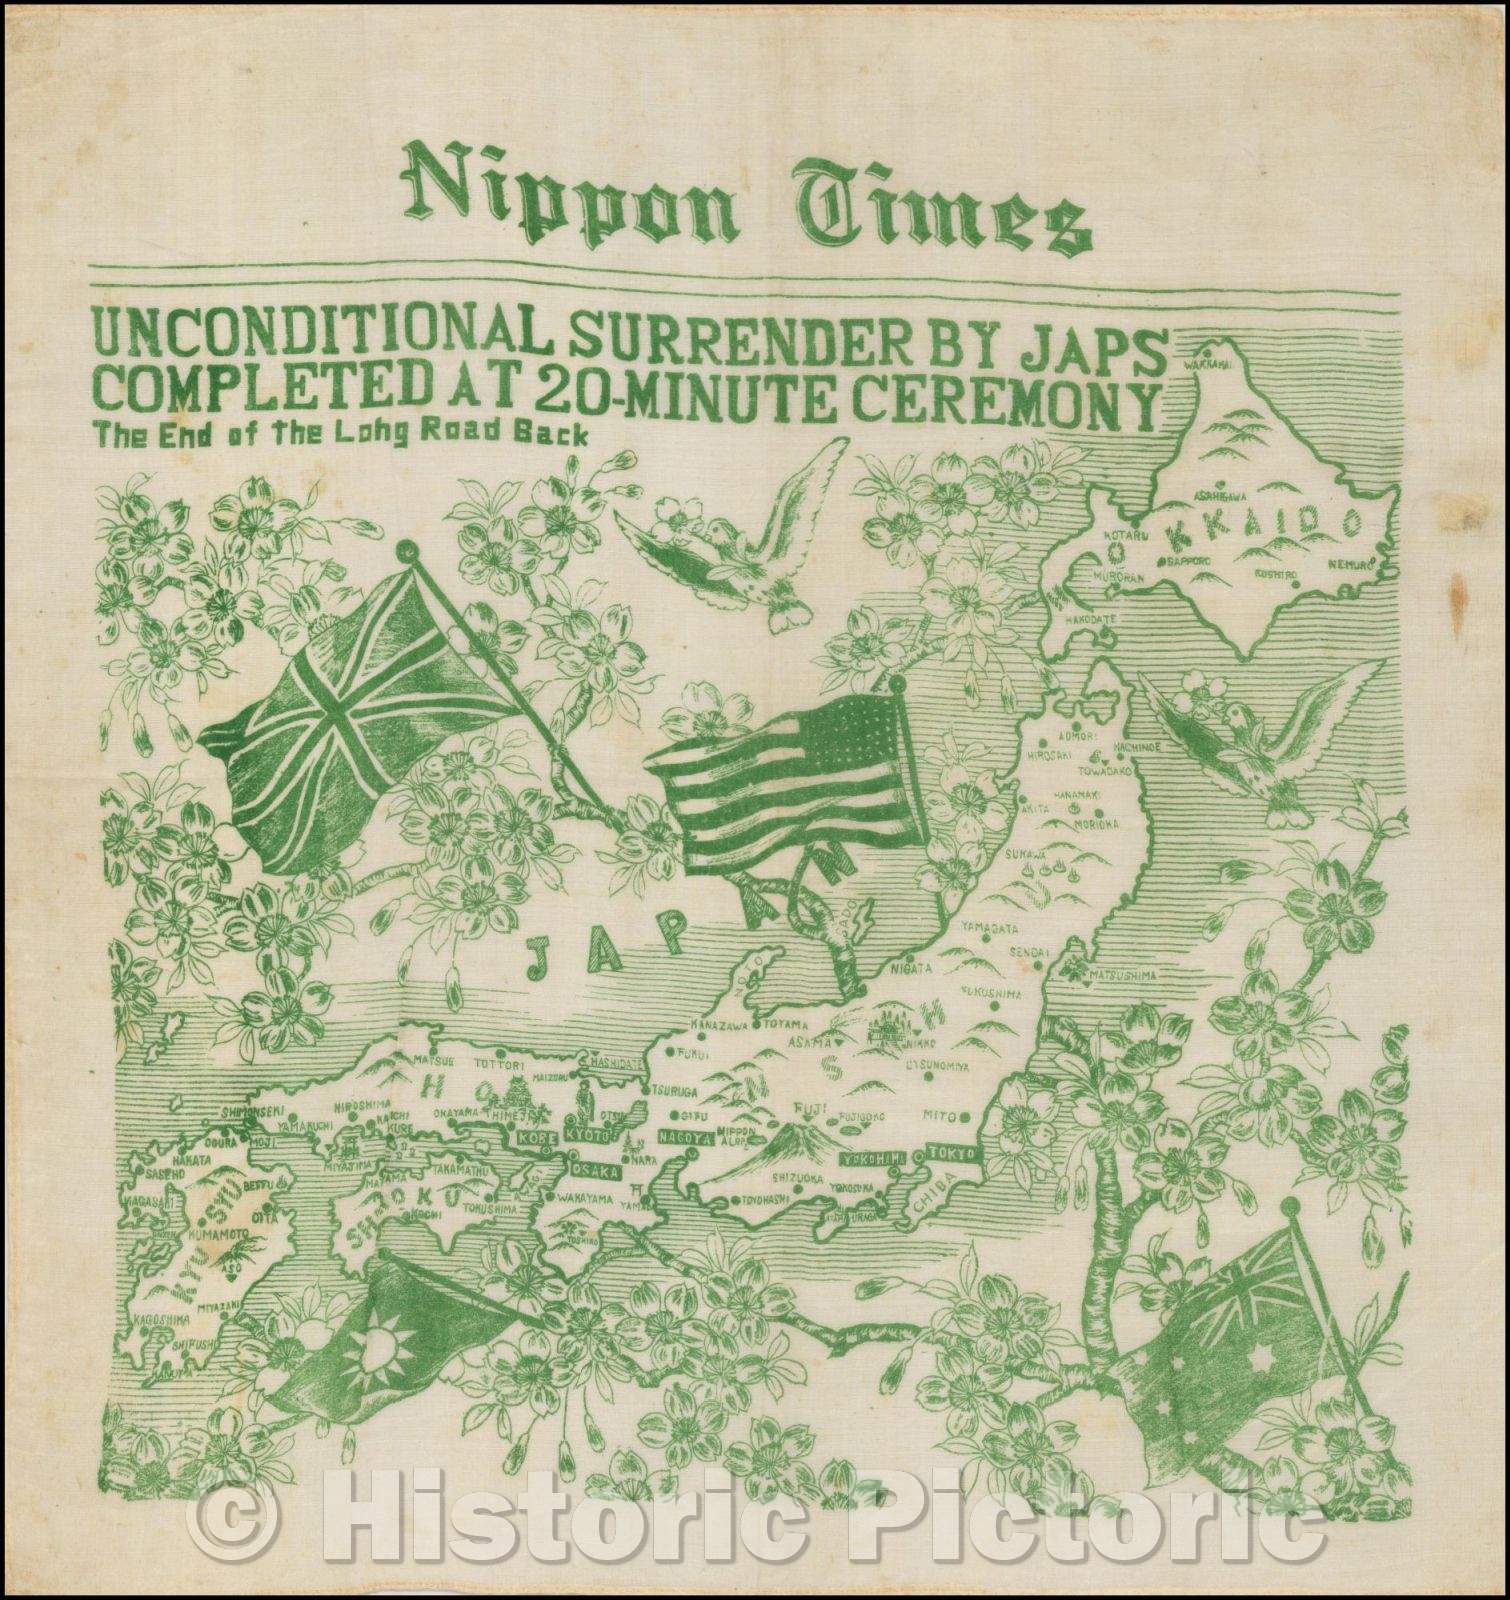 Historic Map - Japan - WWII Propaganda Map, Unconditional Surrender Completed At 20-Minute Ceremony, 1945, - Vintage Wall Art